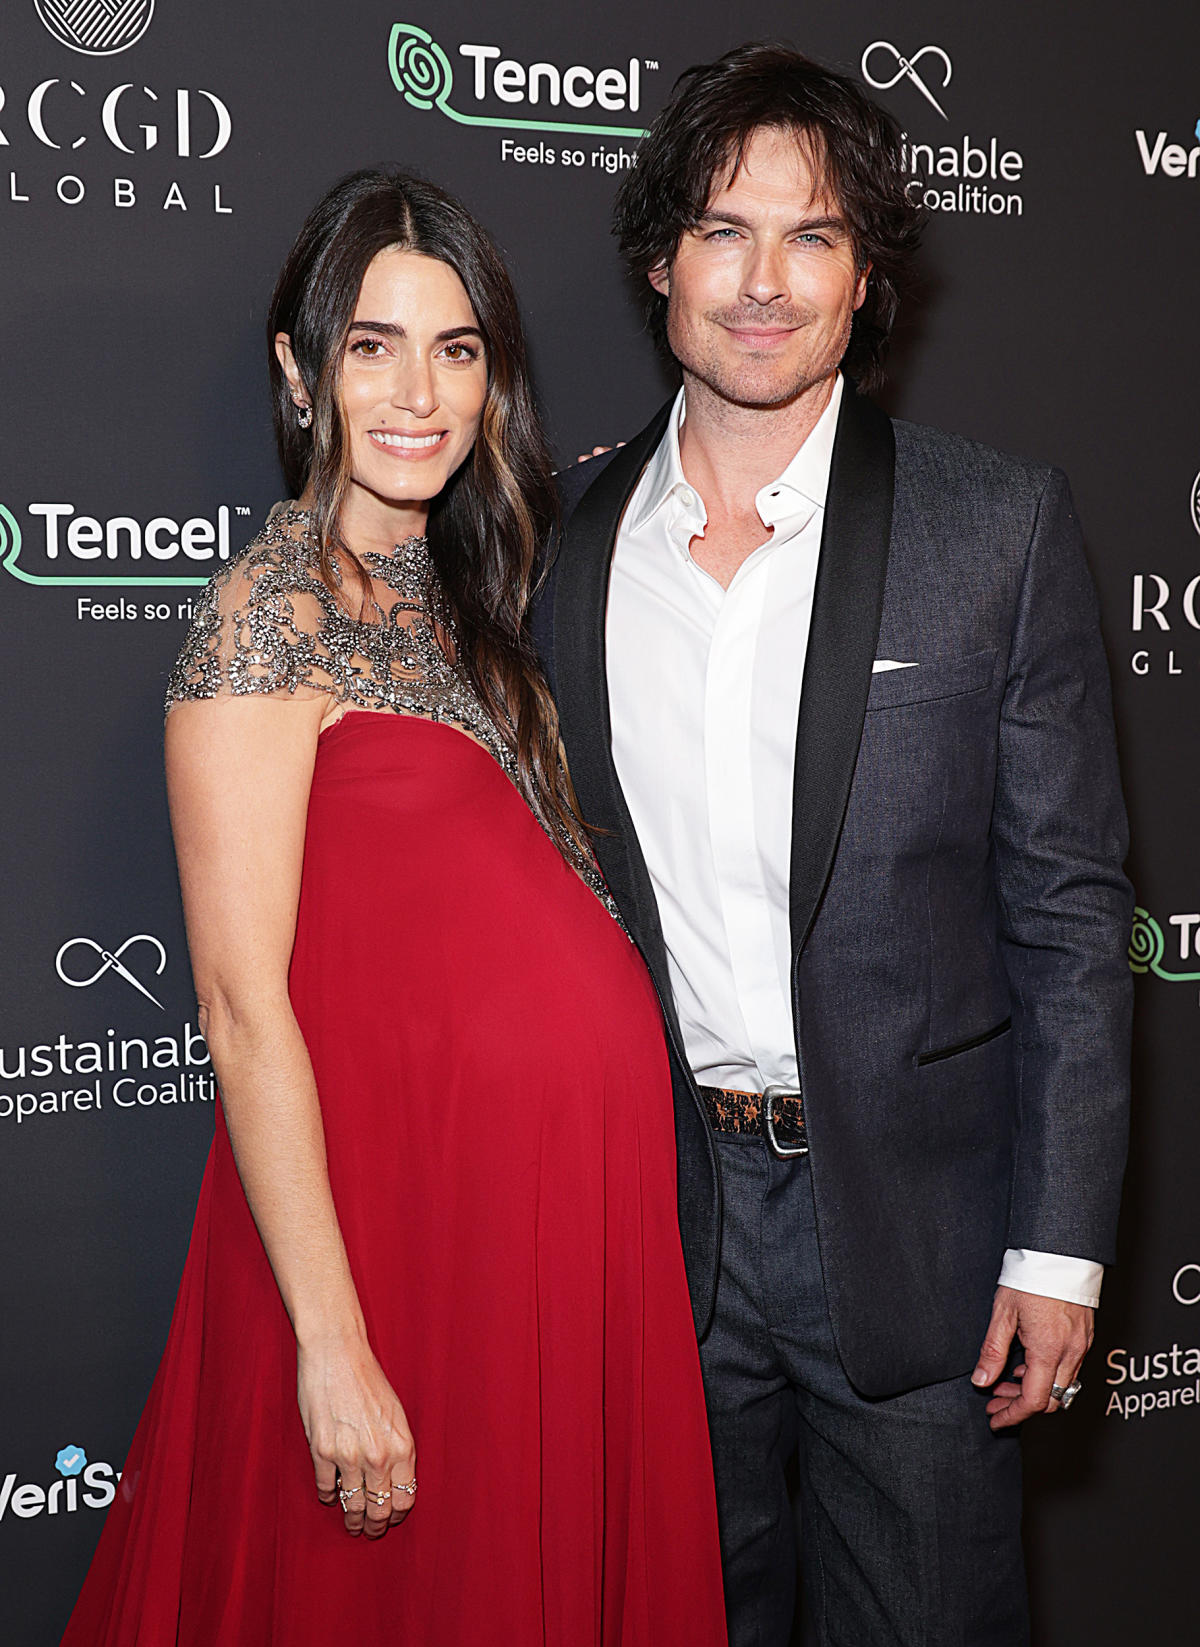 Nikki Reed and Ian Somerhalder 2nd child 'Born at home in water'